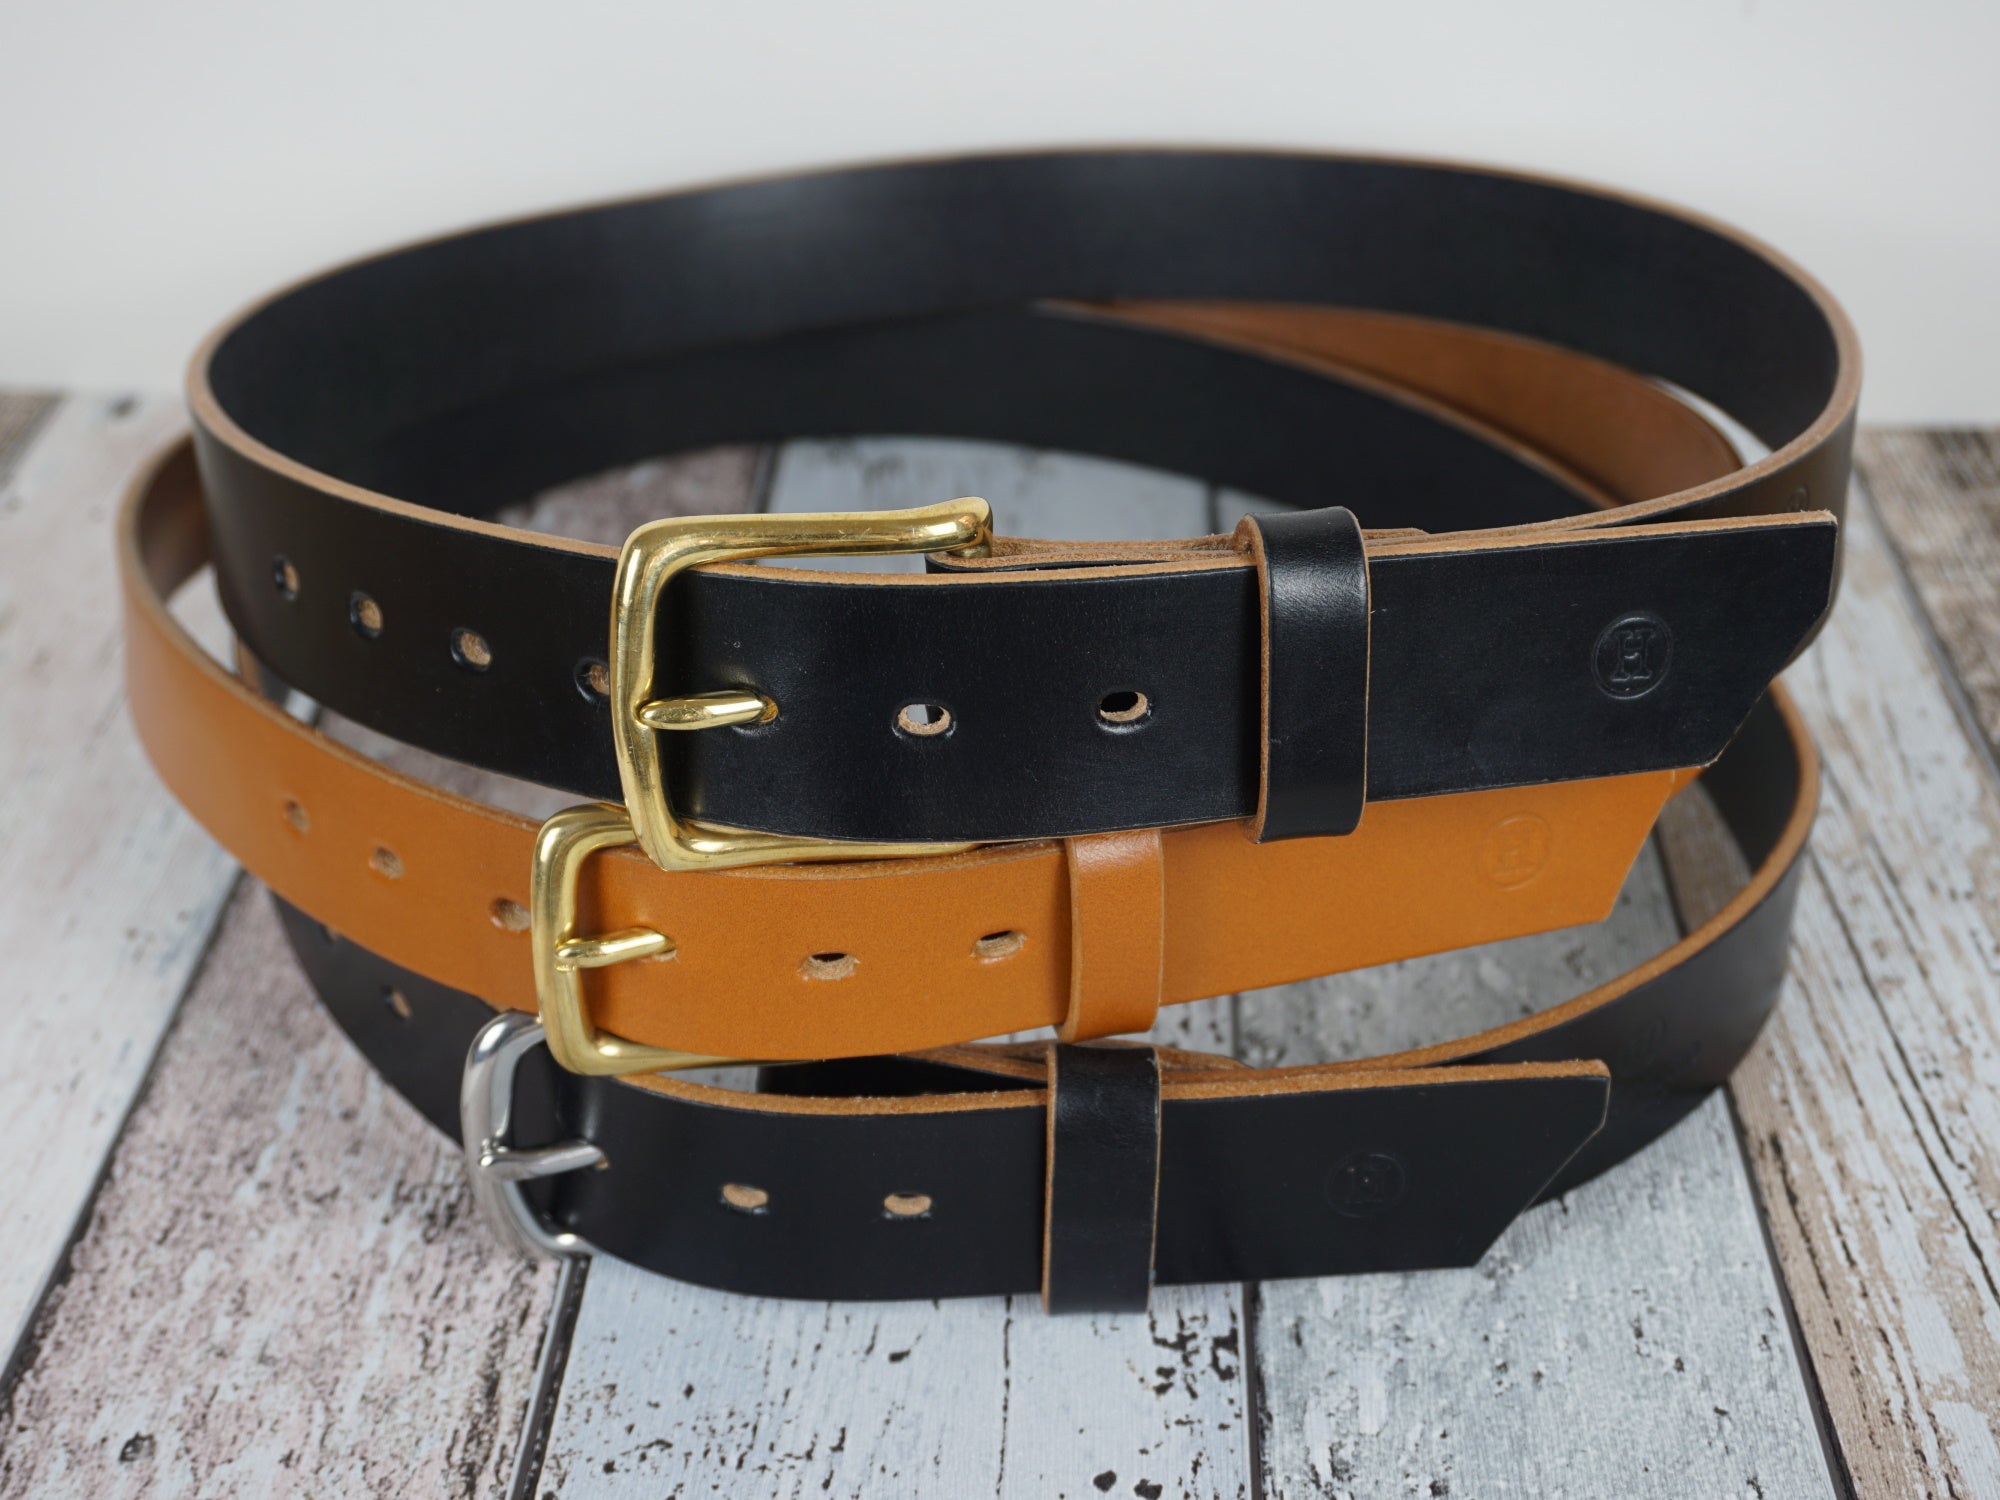 Selection of Sedgwick Leather belts